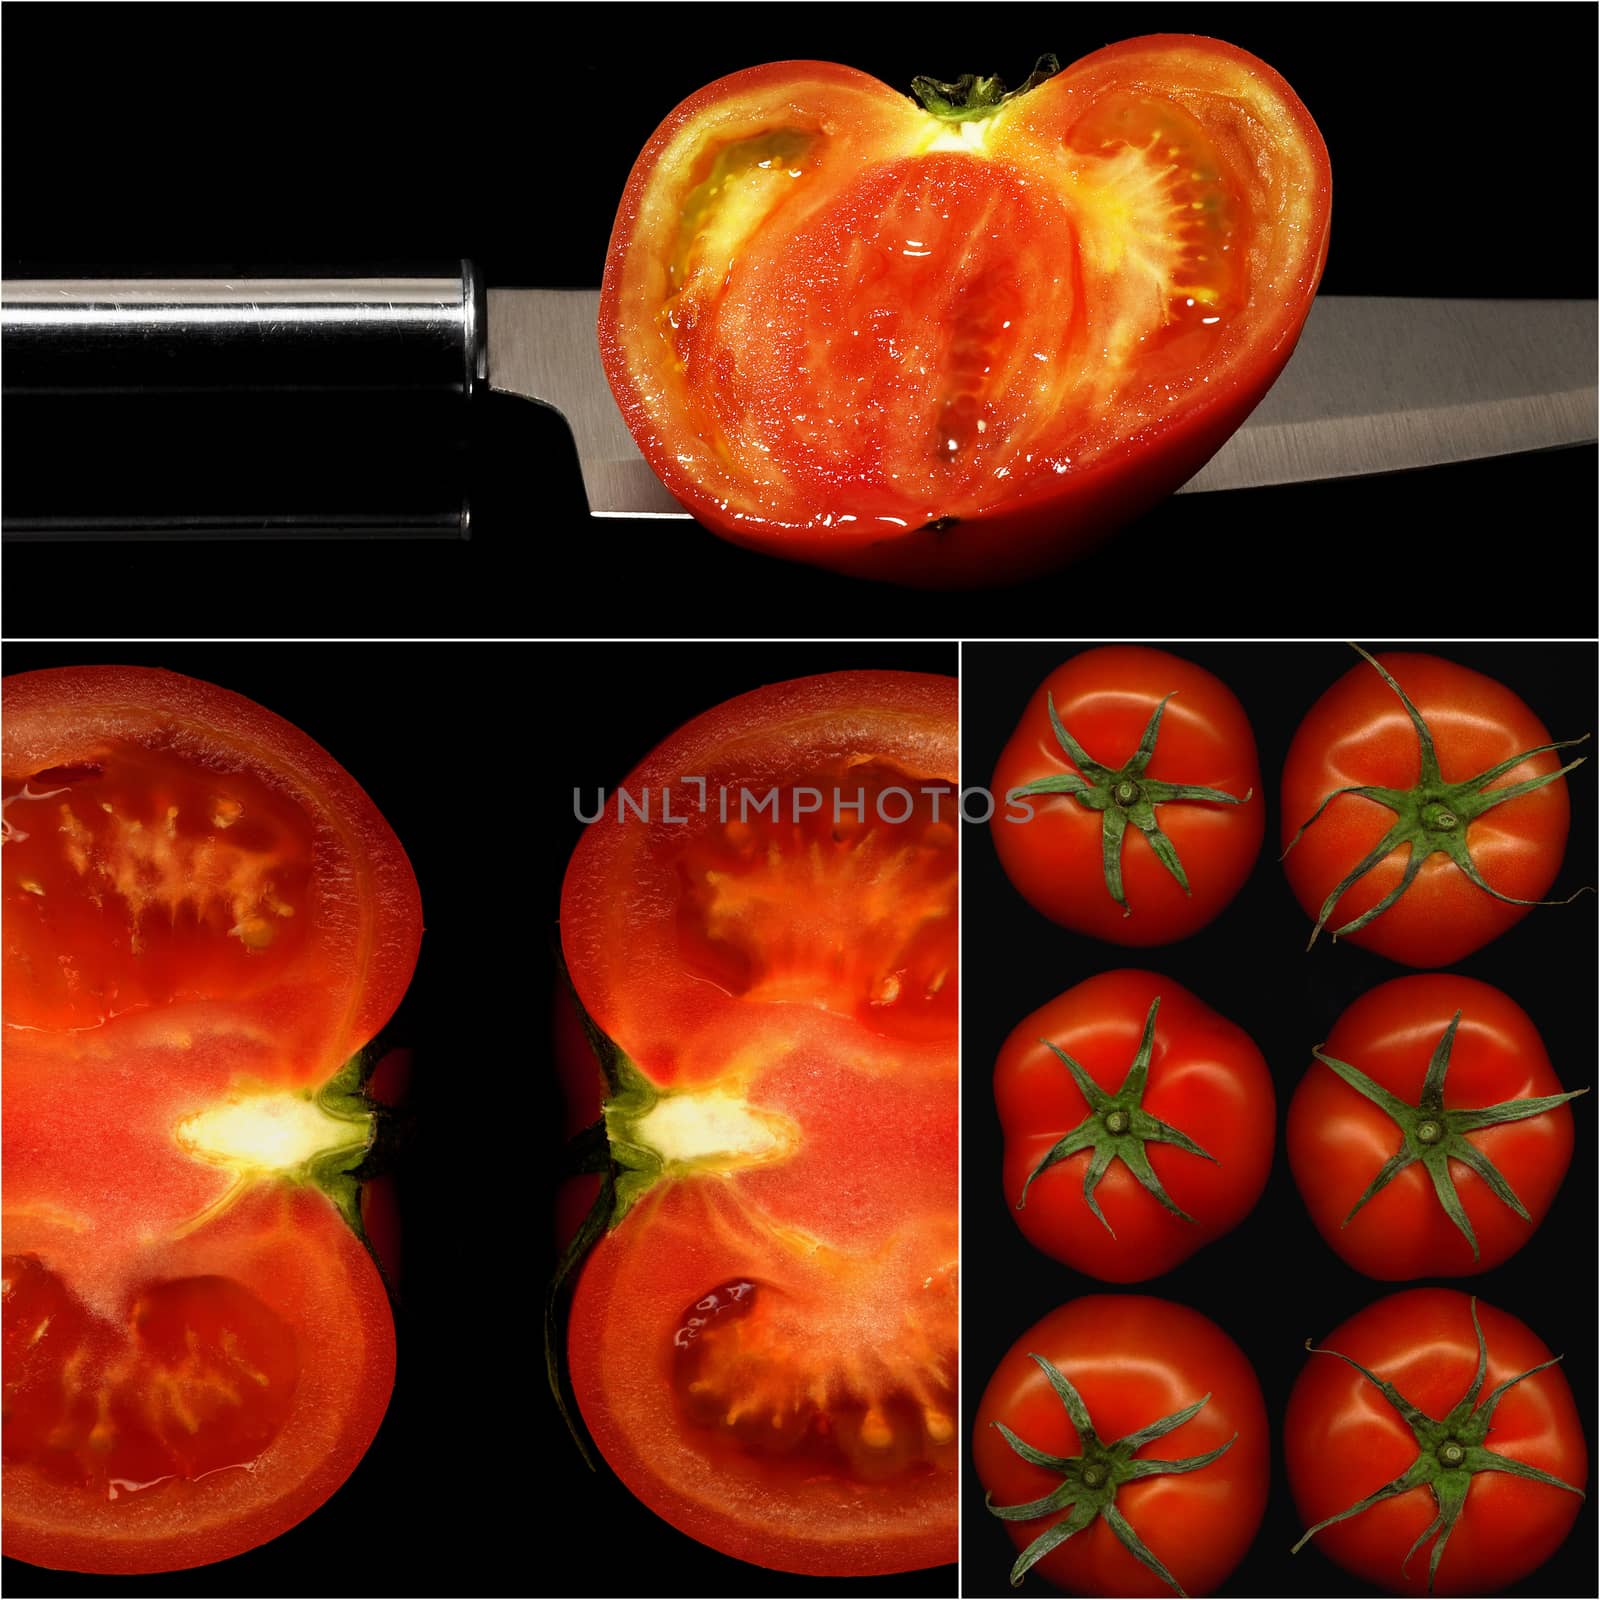 tomatoes collage by keko64